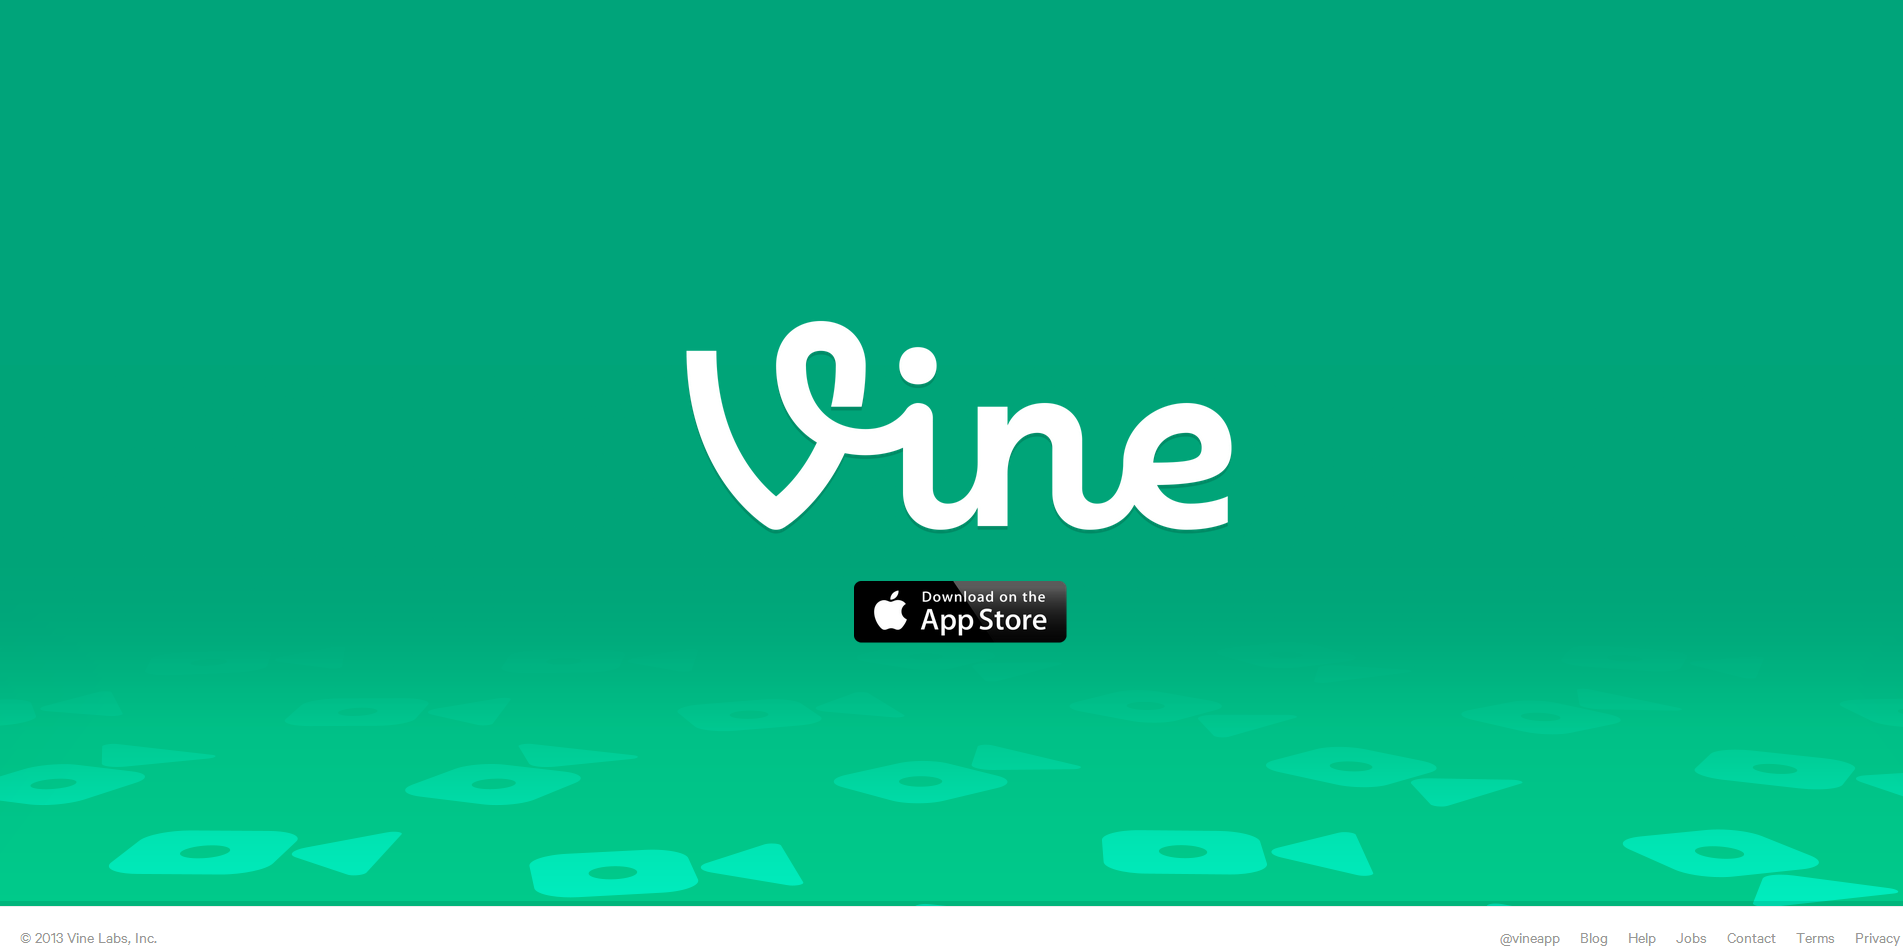 How To Make A Commercial Out Of A Vine